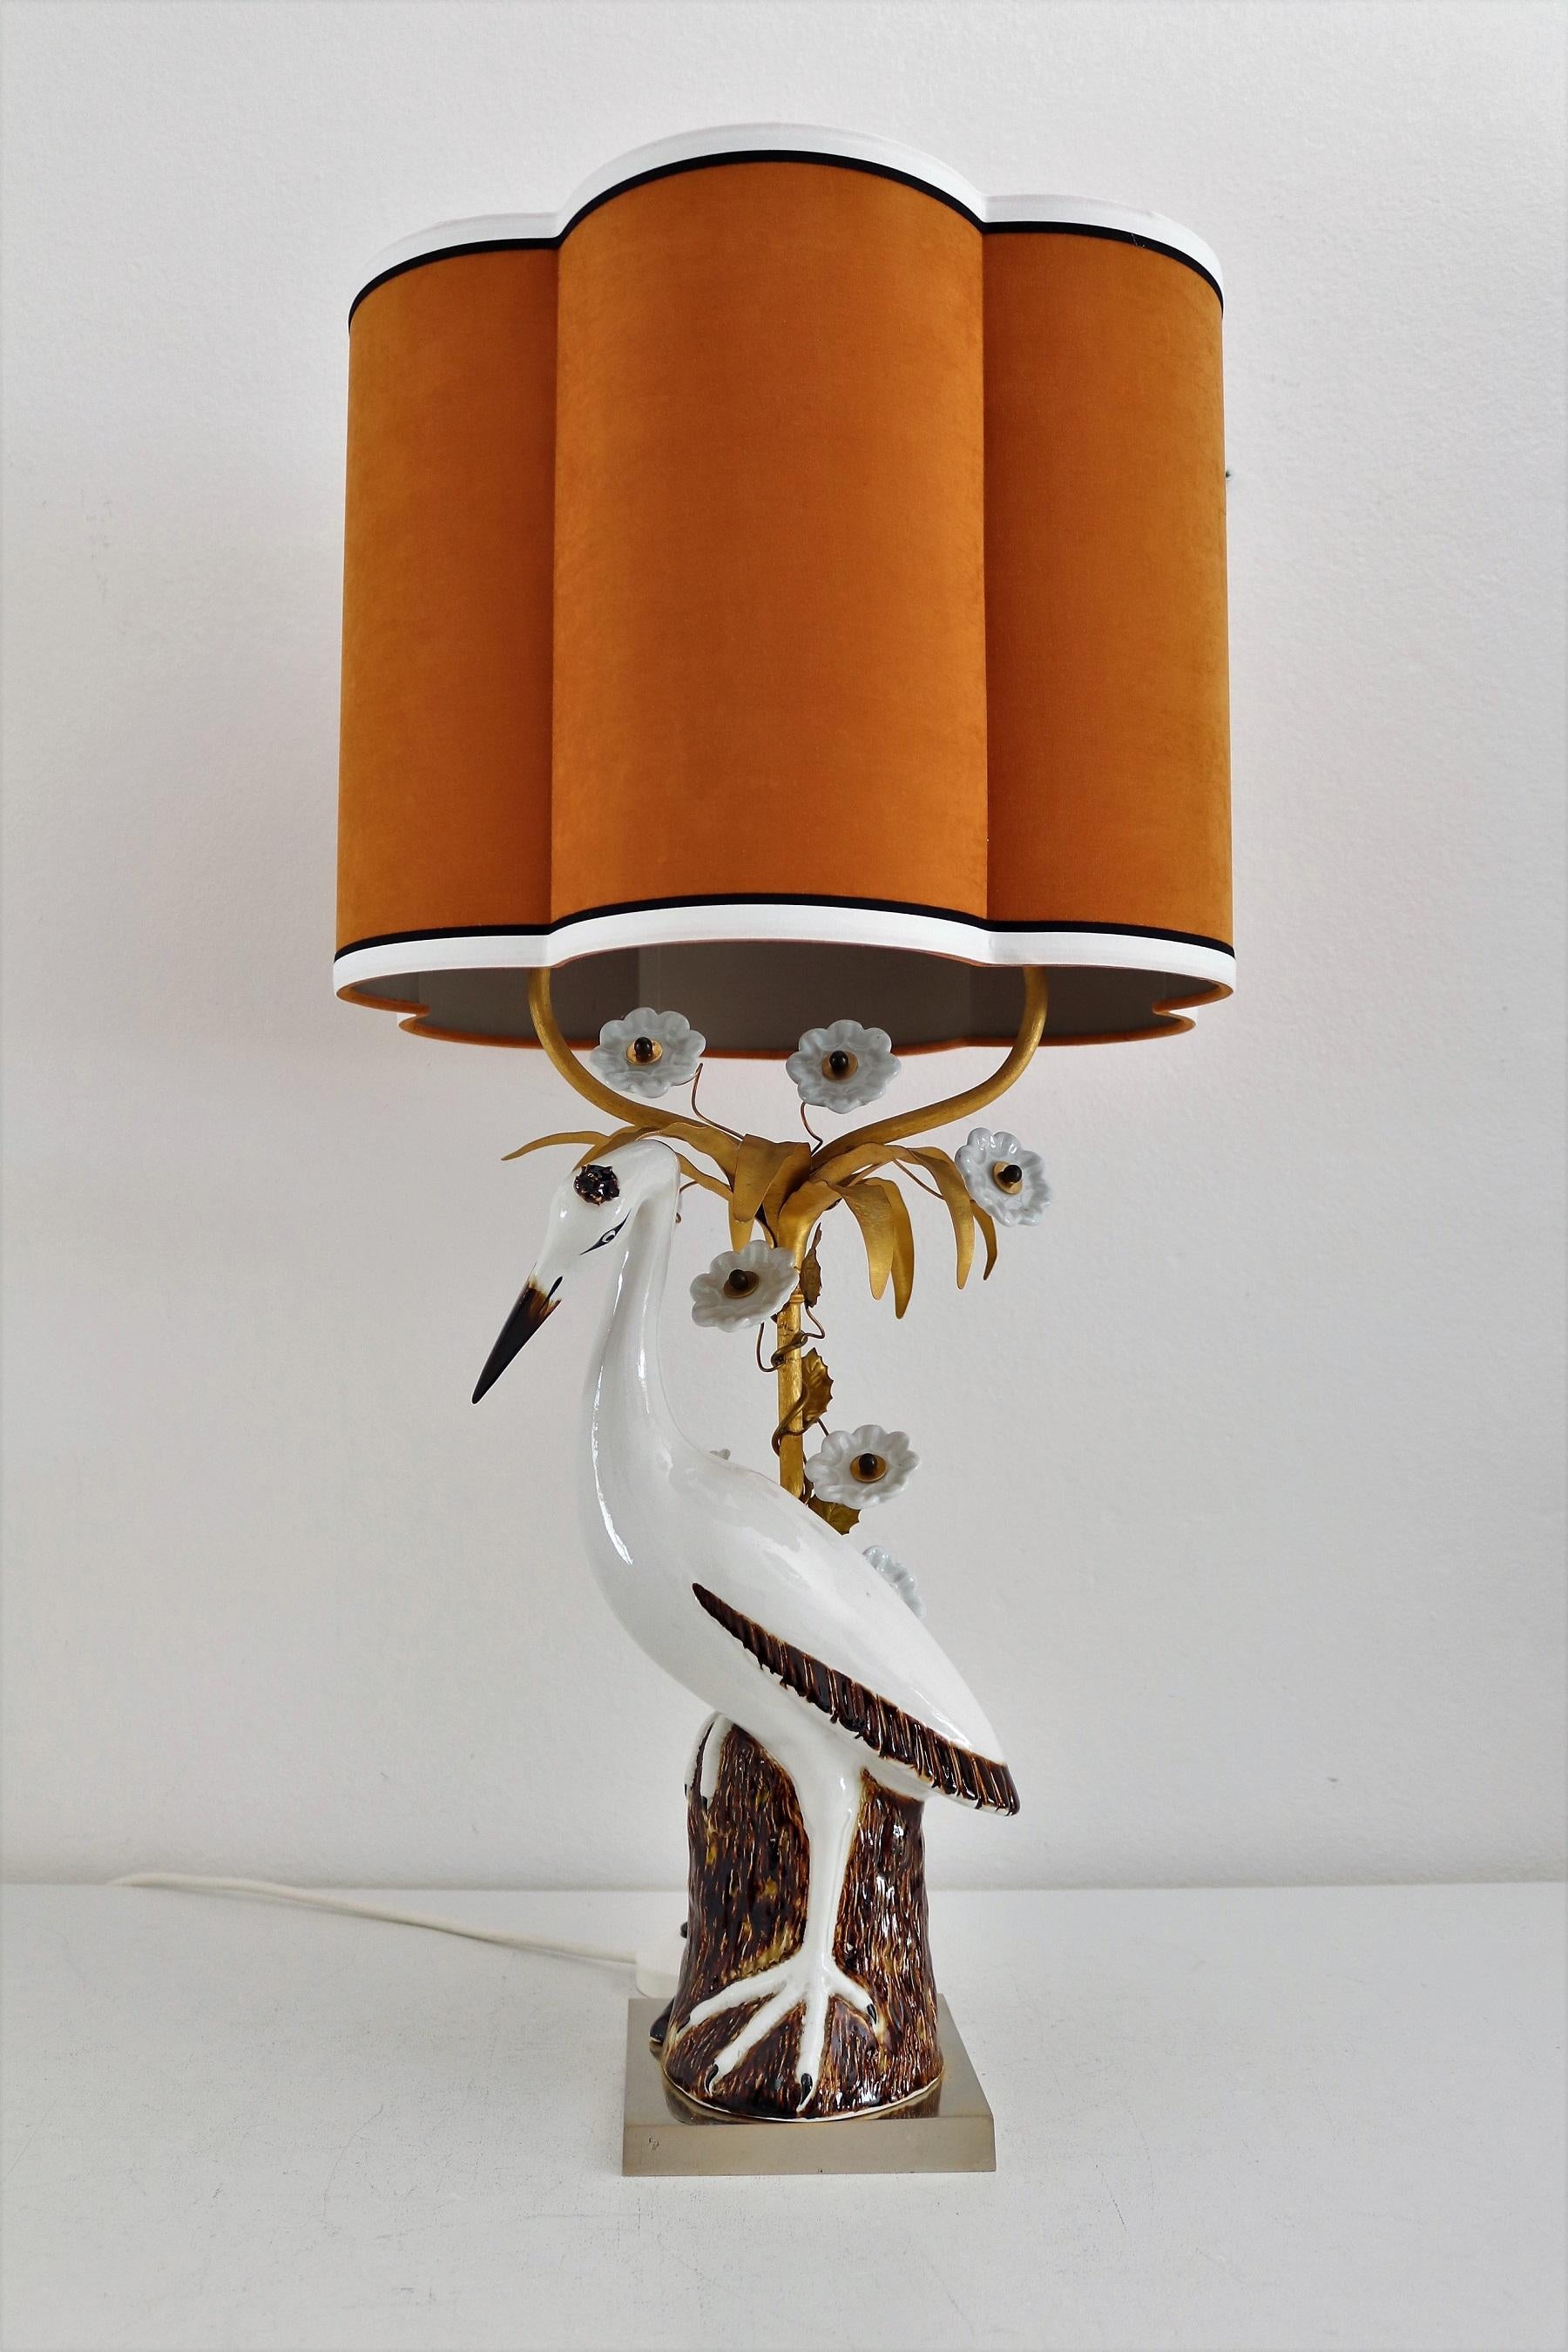 French Table Lamp with Porcelain Crane or Heron and Flowers, 1970s For Sale 2